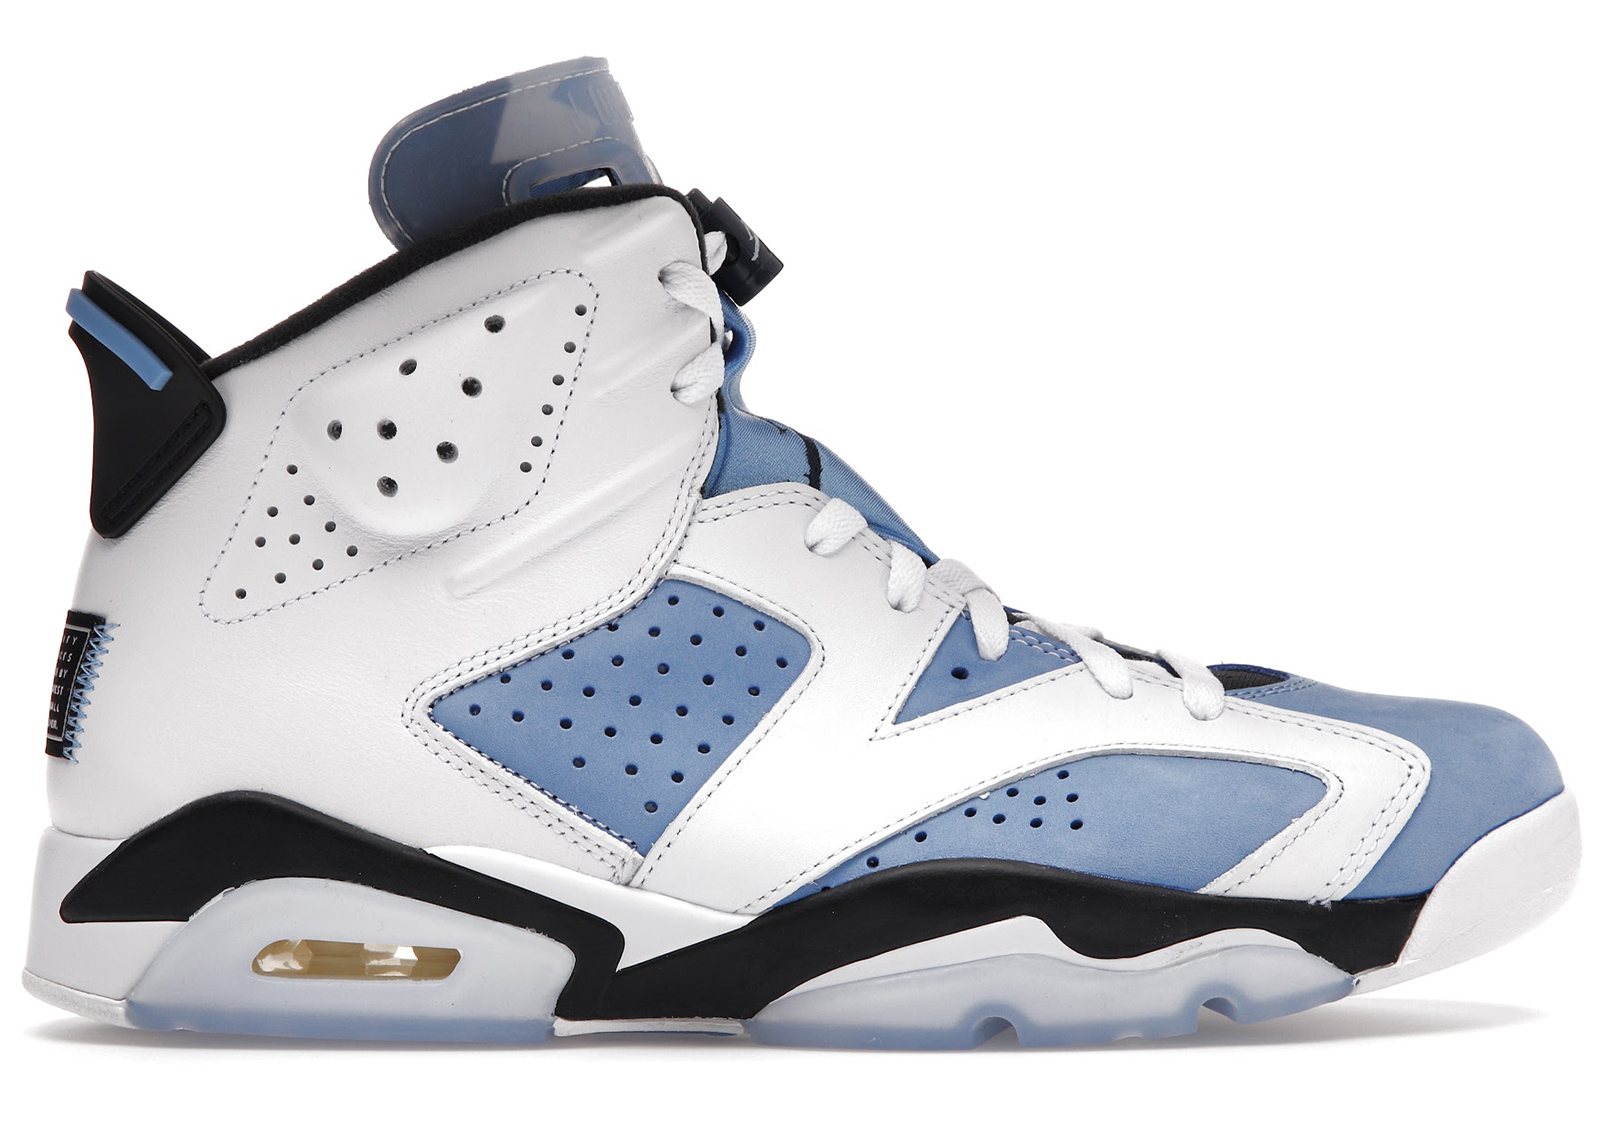 Jordan 6 - All Sizes & Colorways from $67 at StockX